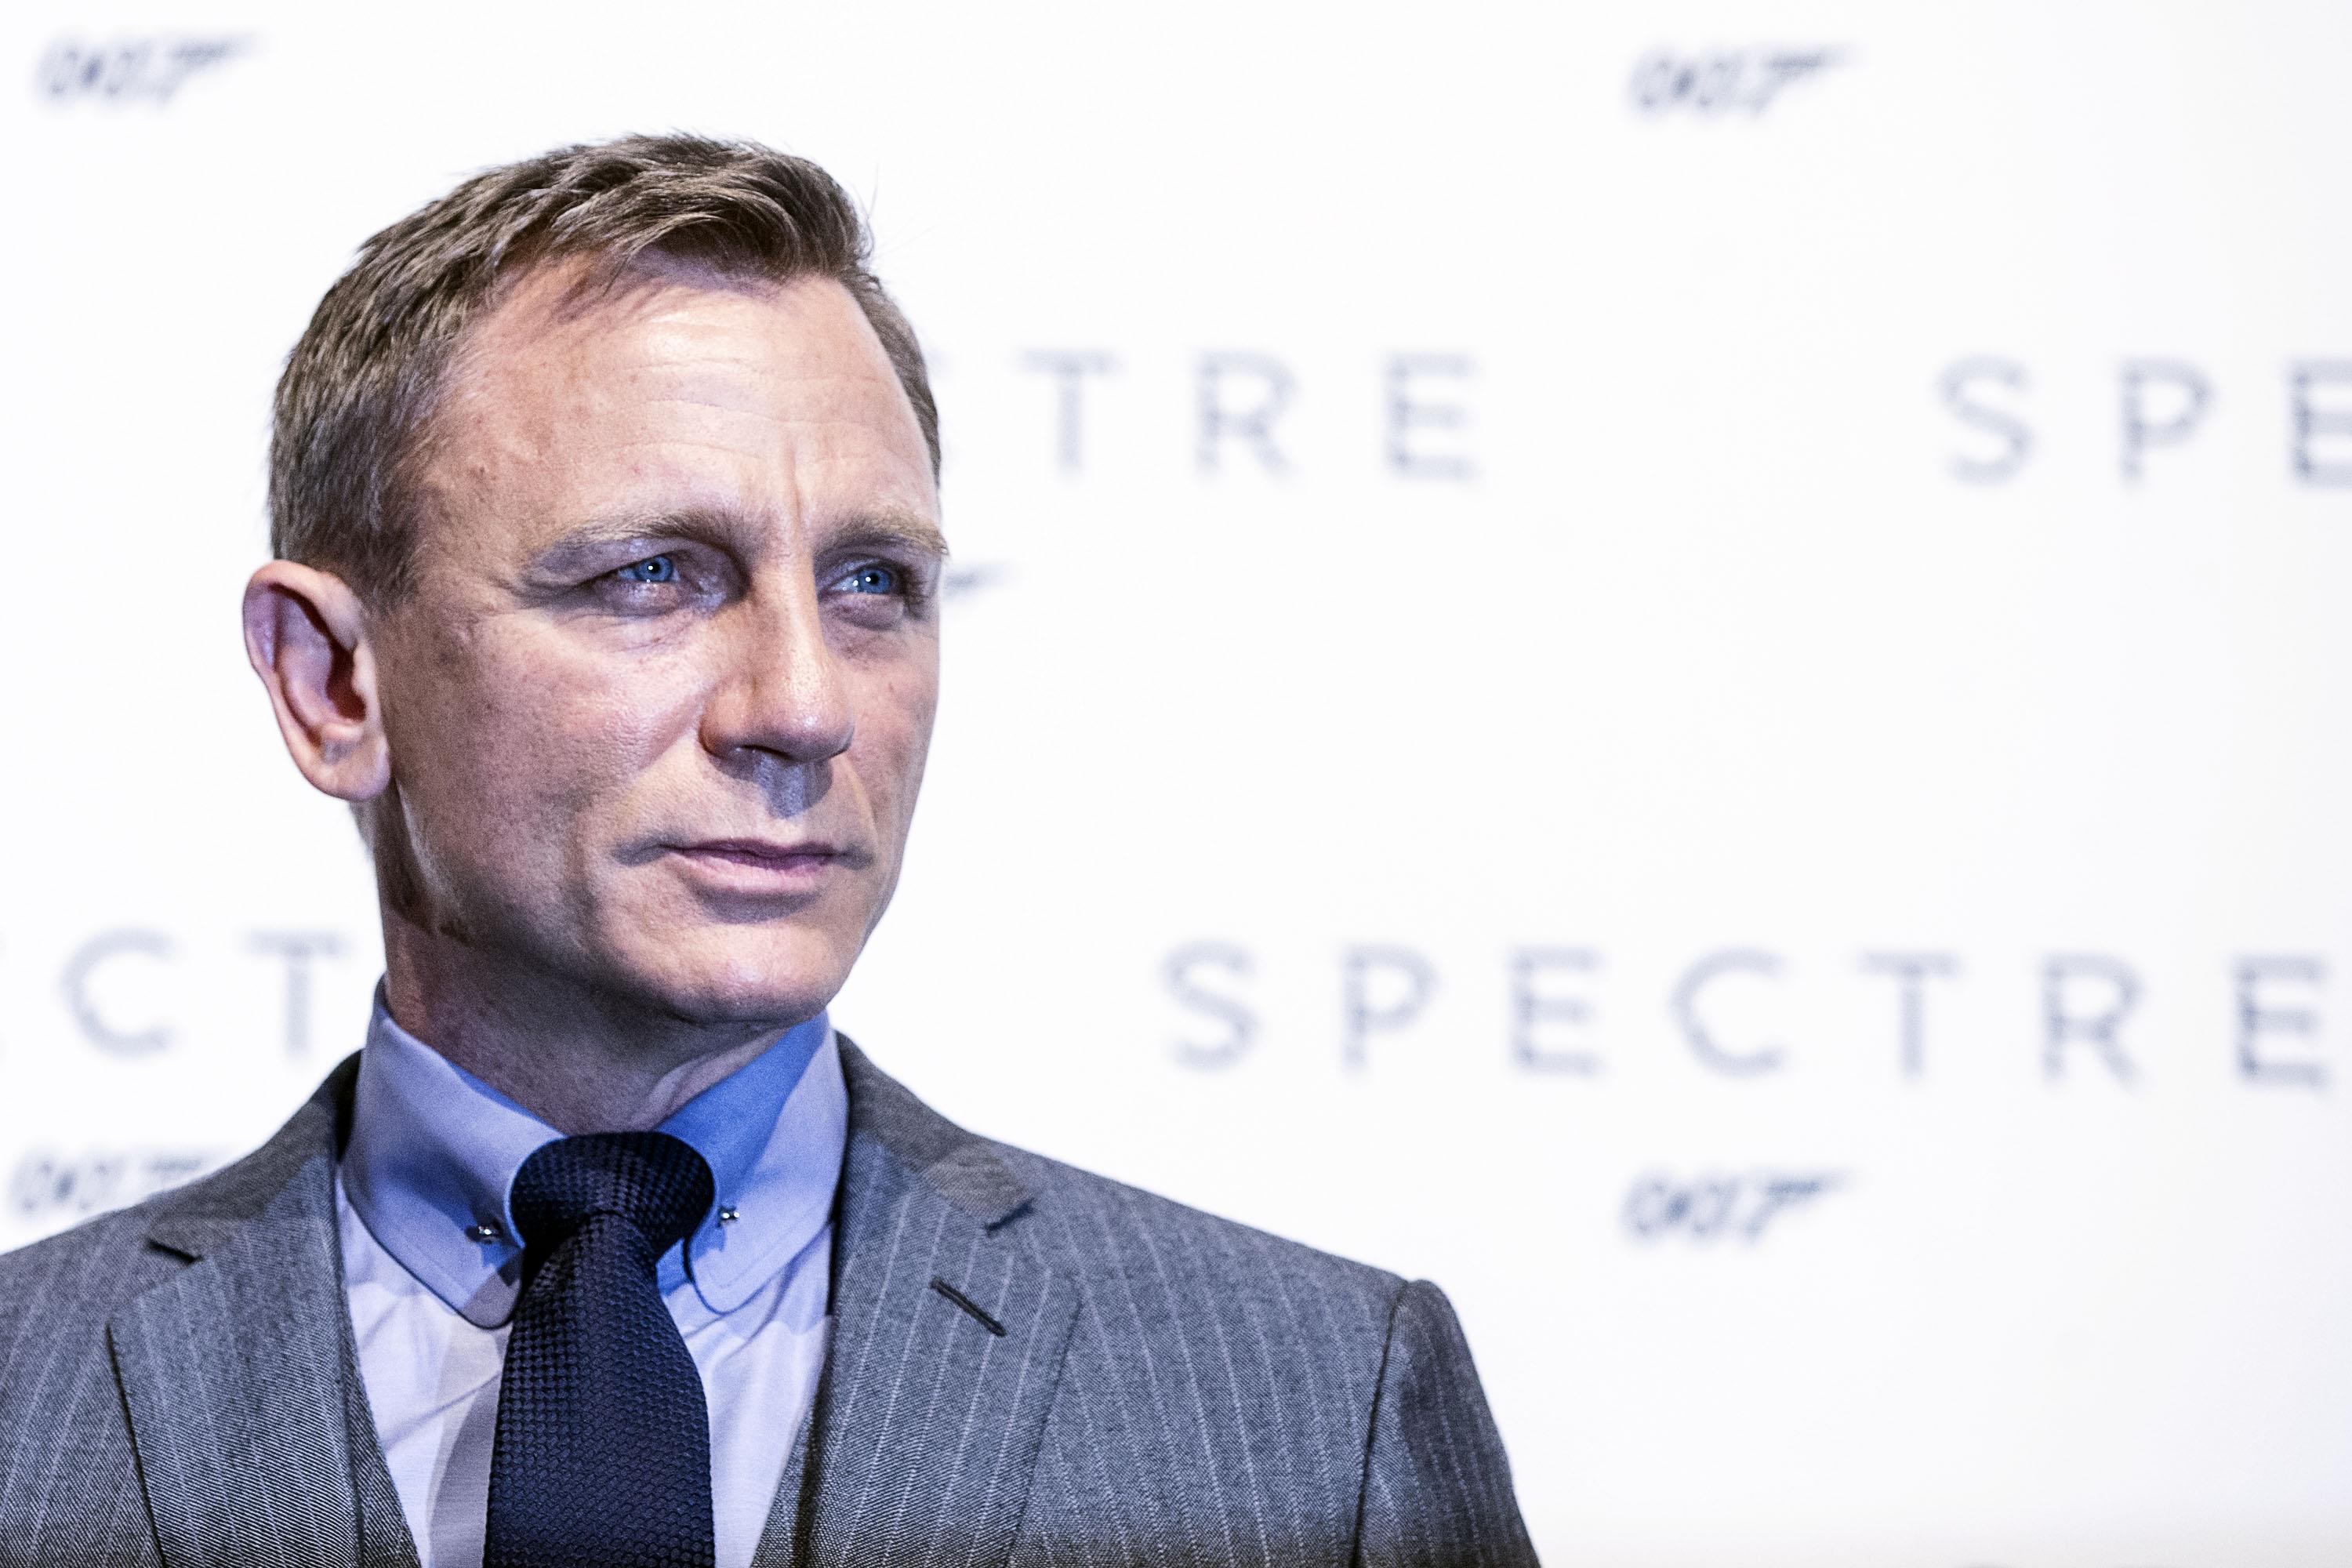 The UK's Secret Intelligence Service, MI6, is to recruit 1000 more spies by 2020. (File photo of Daniel Craig at a press event for James Bond film Spectre). (ANGELO CARCONI—ANSA via AP)